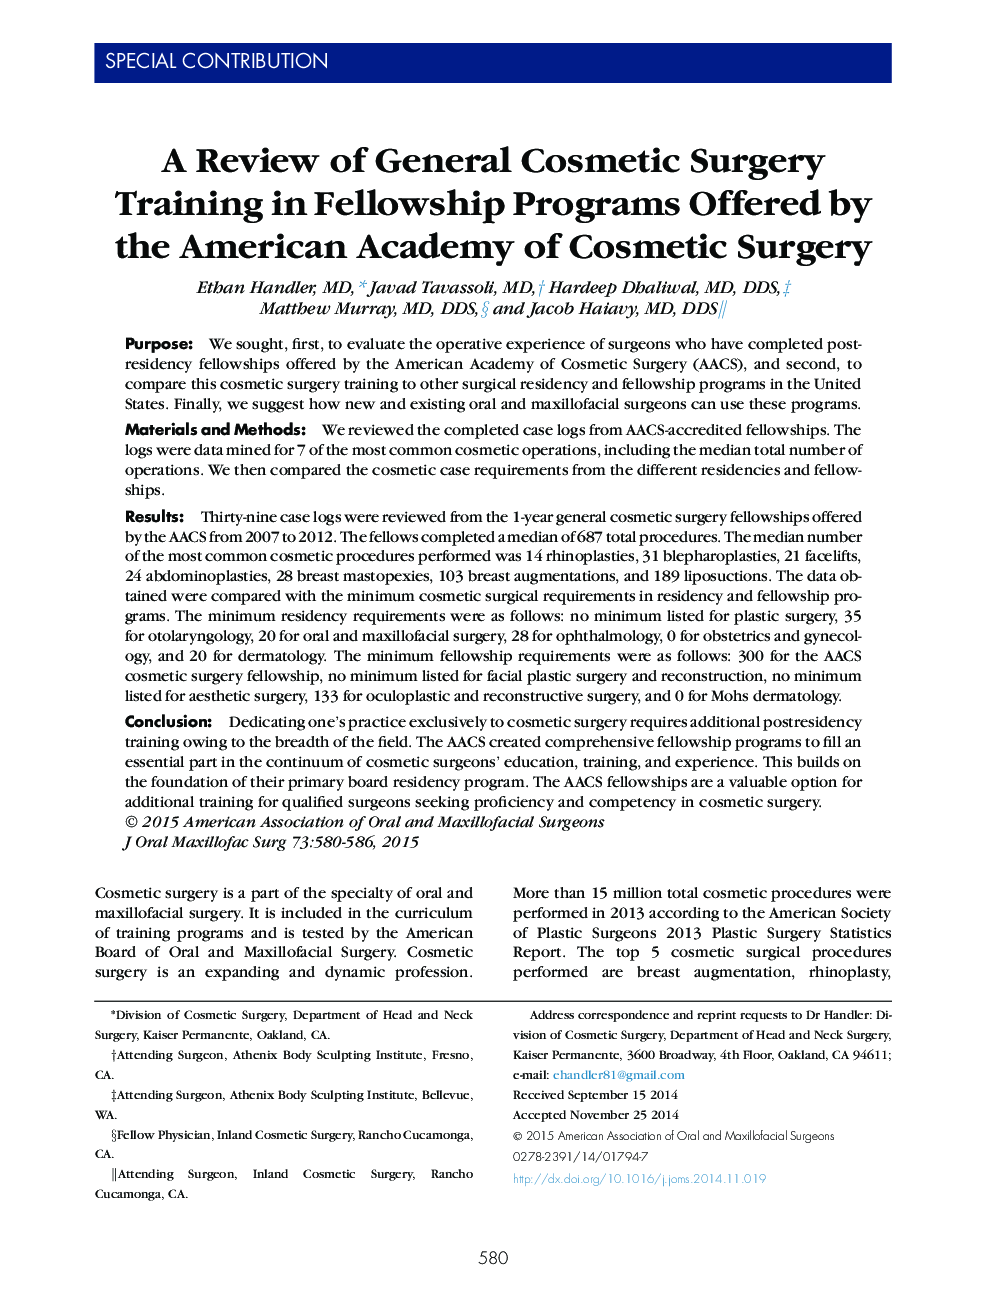 A Review of General Cosmetic Surgery Training in Fellowship Programs Offered by the American Academy of Cosmetic Surgery